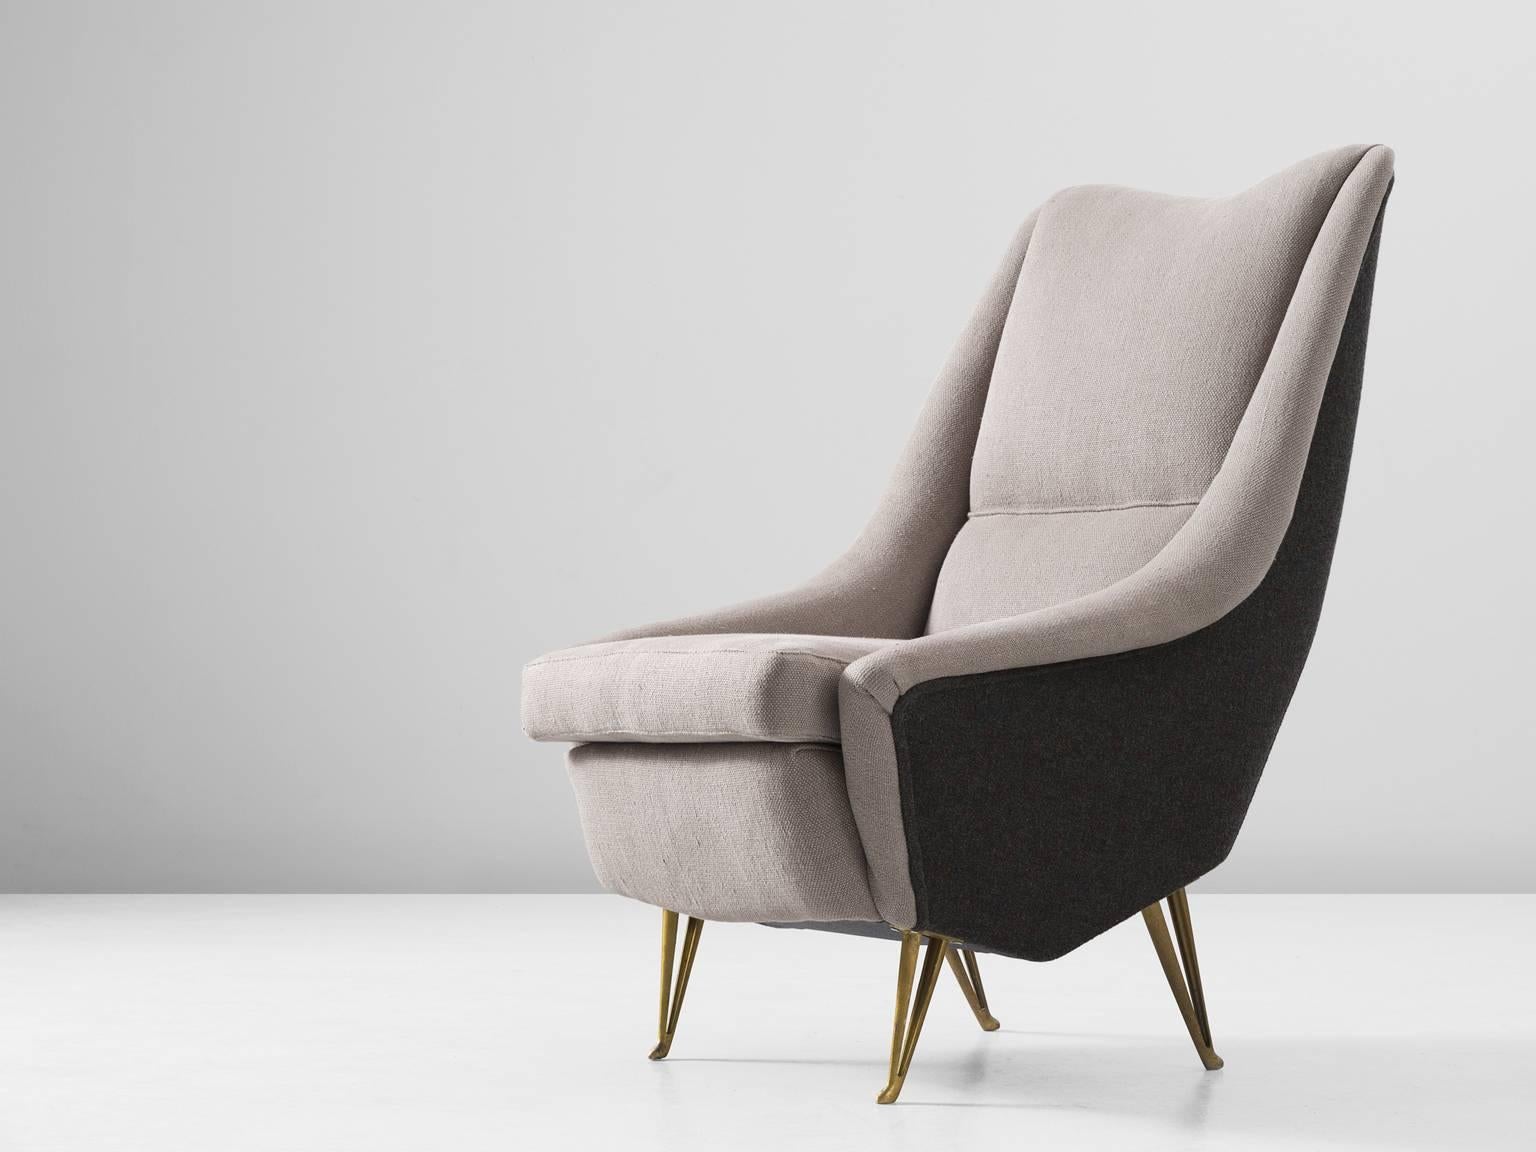 Lounge chair, in fabric and metal, for ISA, Italy, 1950s.

Elegantly shaped Italian lounge chair in two-tone grey upholstery. Beautiful tapered legs in brass colored metal, with a nice v-shaped opening. The dark grey upholstered outside emphasize